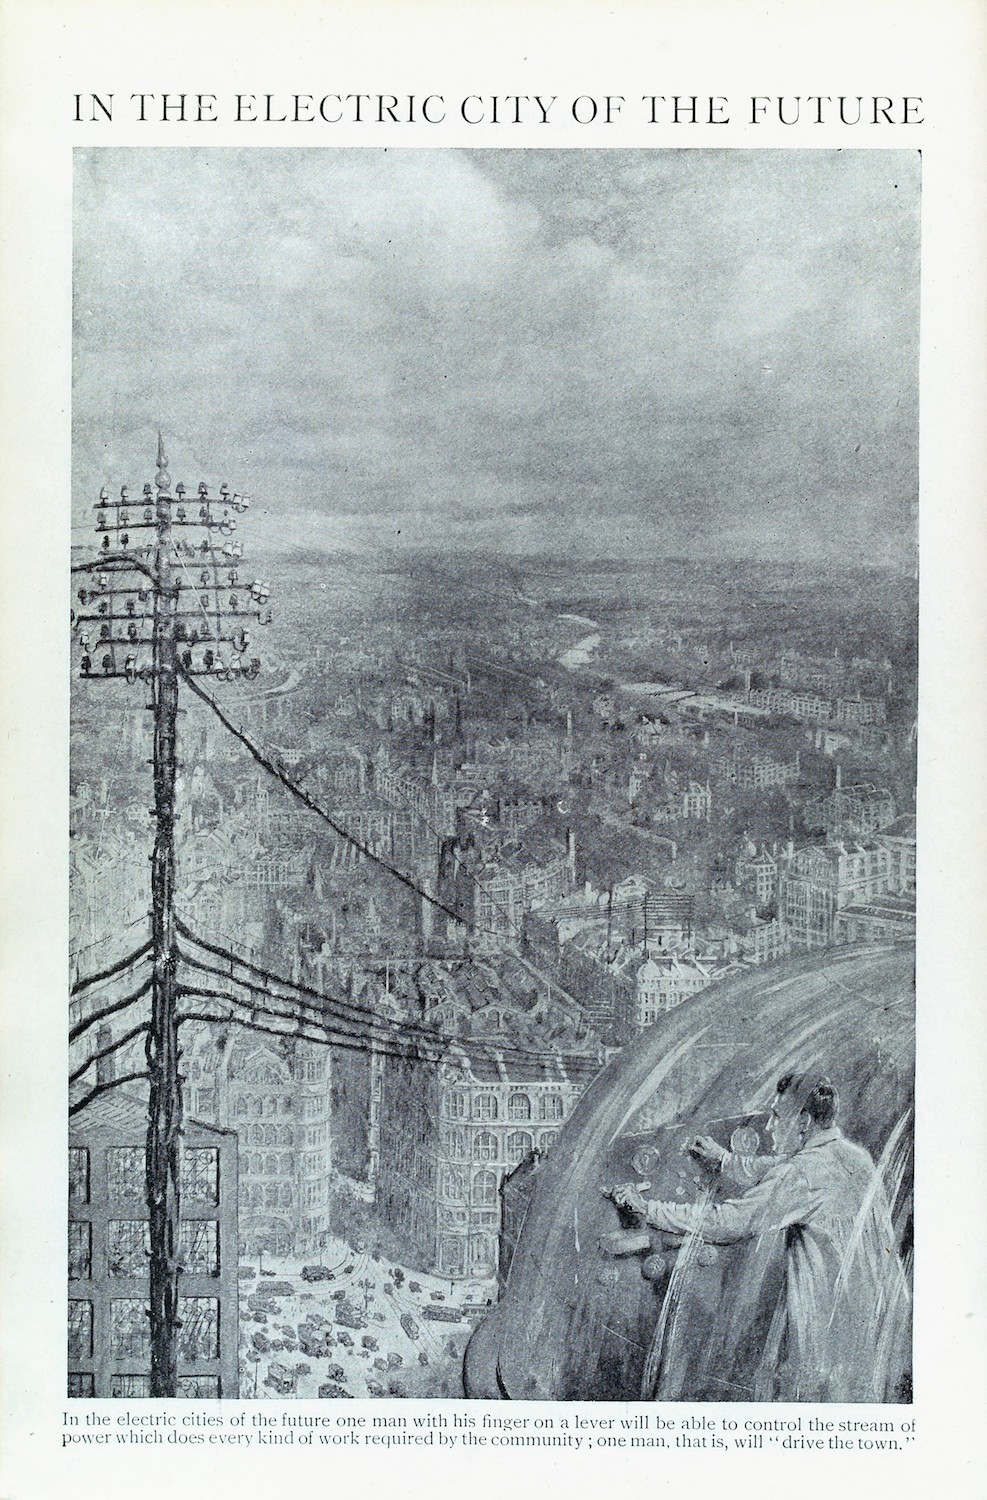 Image from book of black and white painting of a town with an electricity pylon and a man in a clear bubble controlling levers.